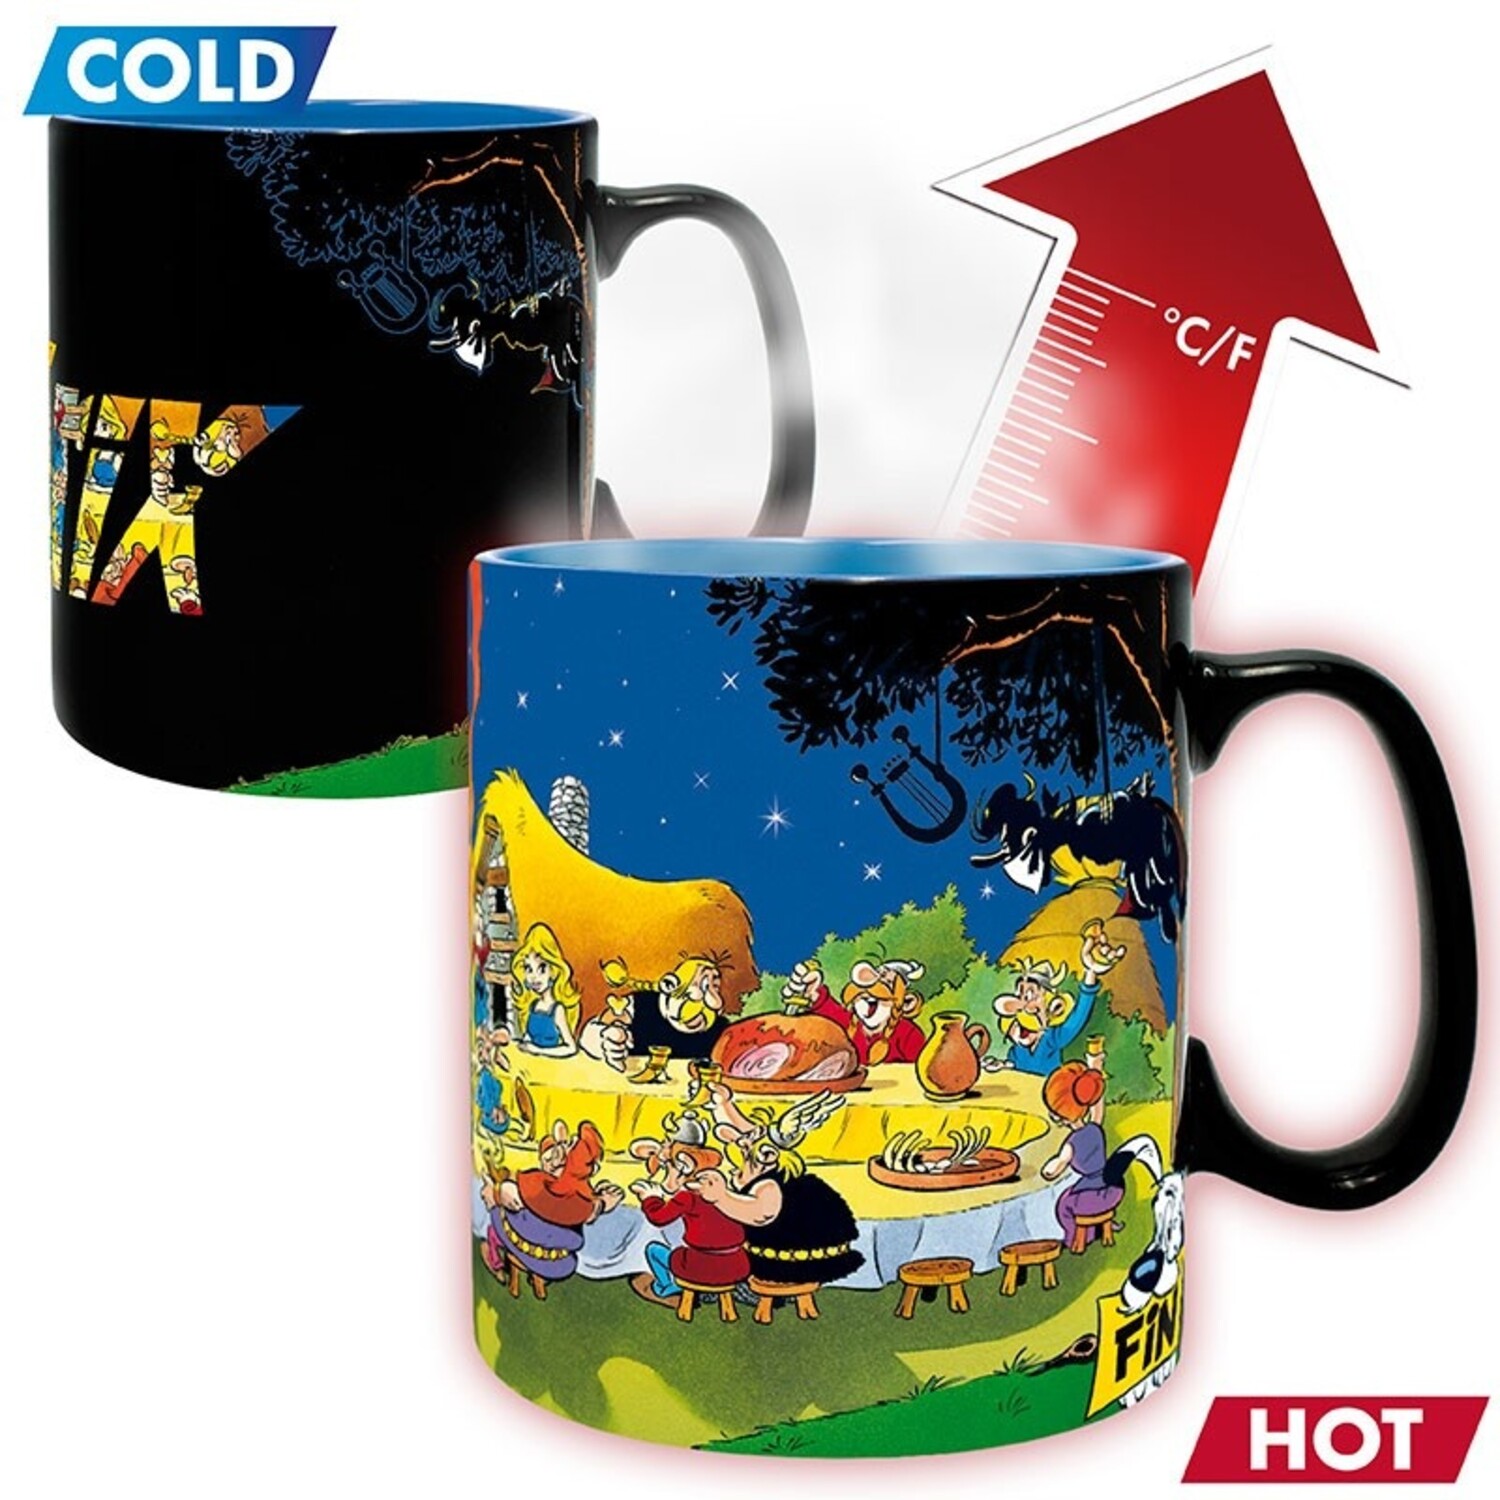 ABY Style Asterix Banquet Heat Change Mug